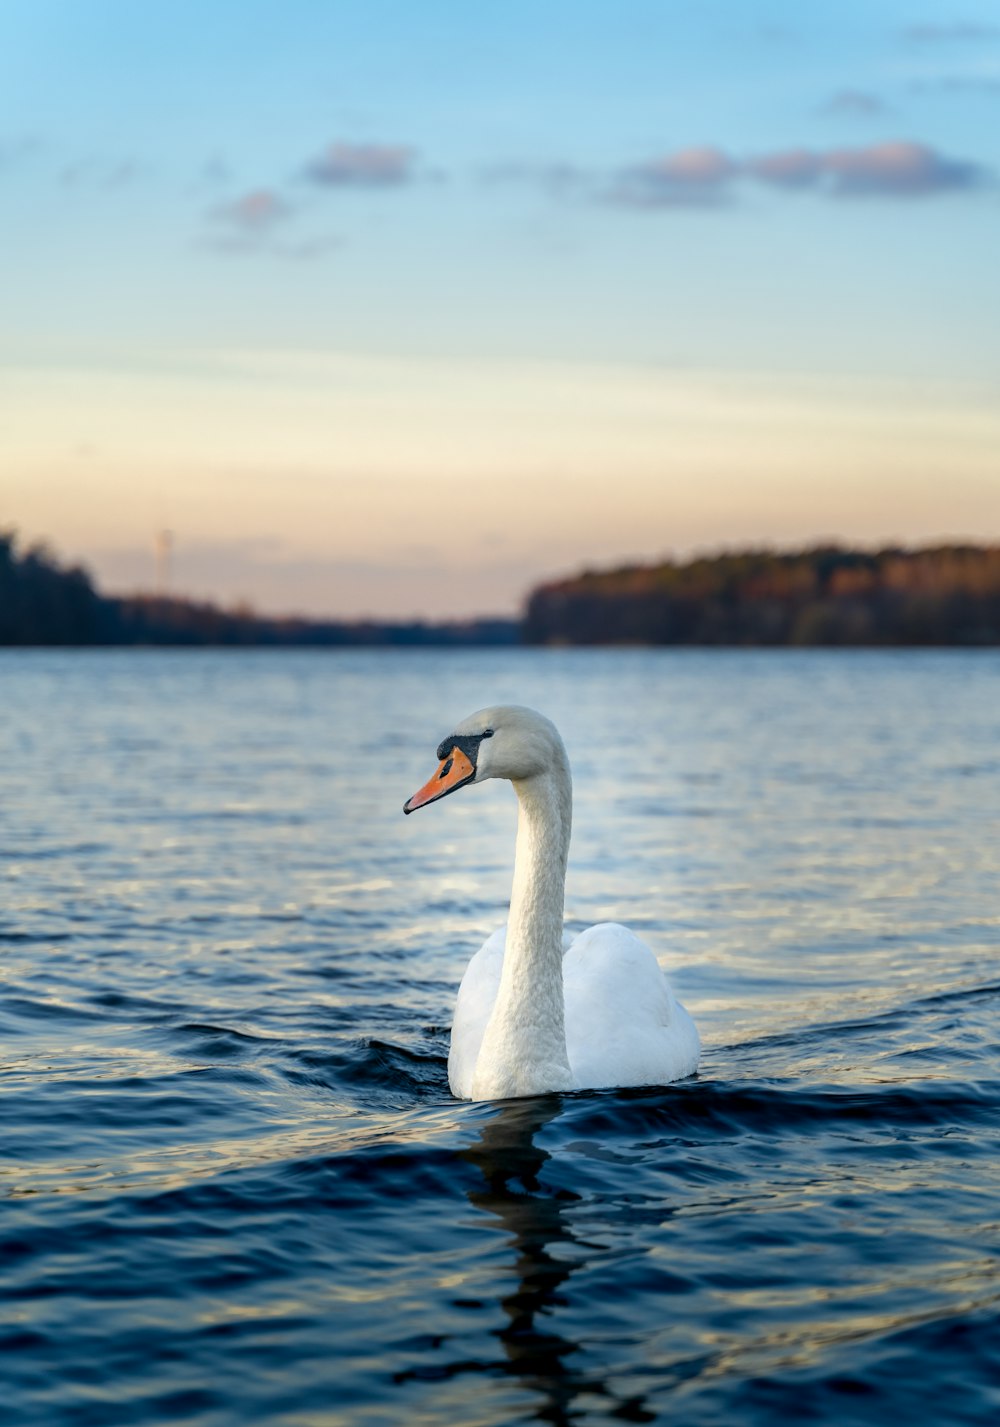 white swan on body of water during daytime